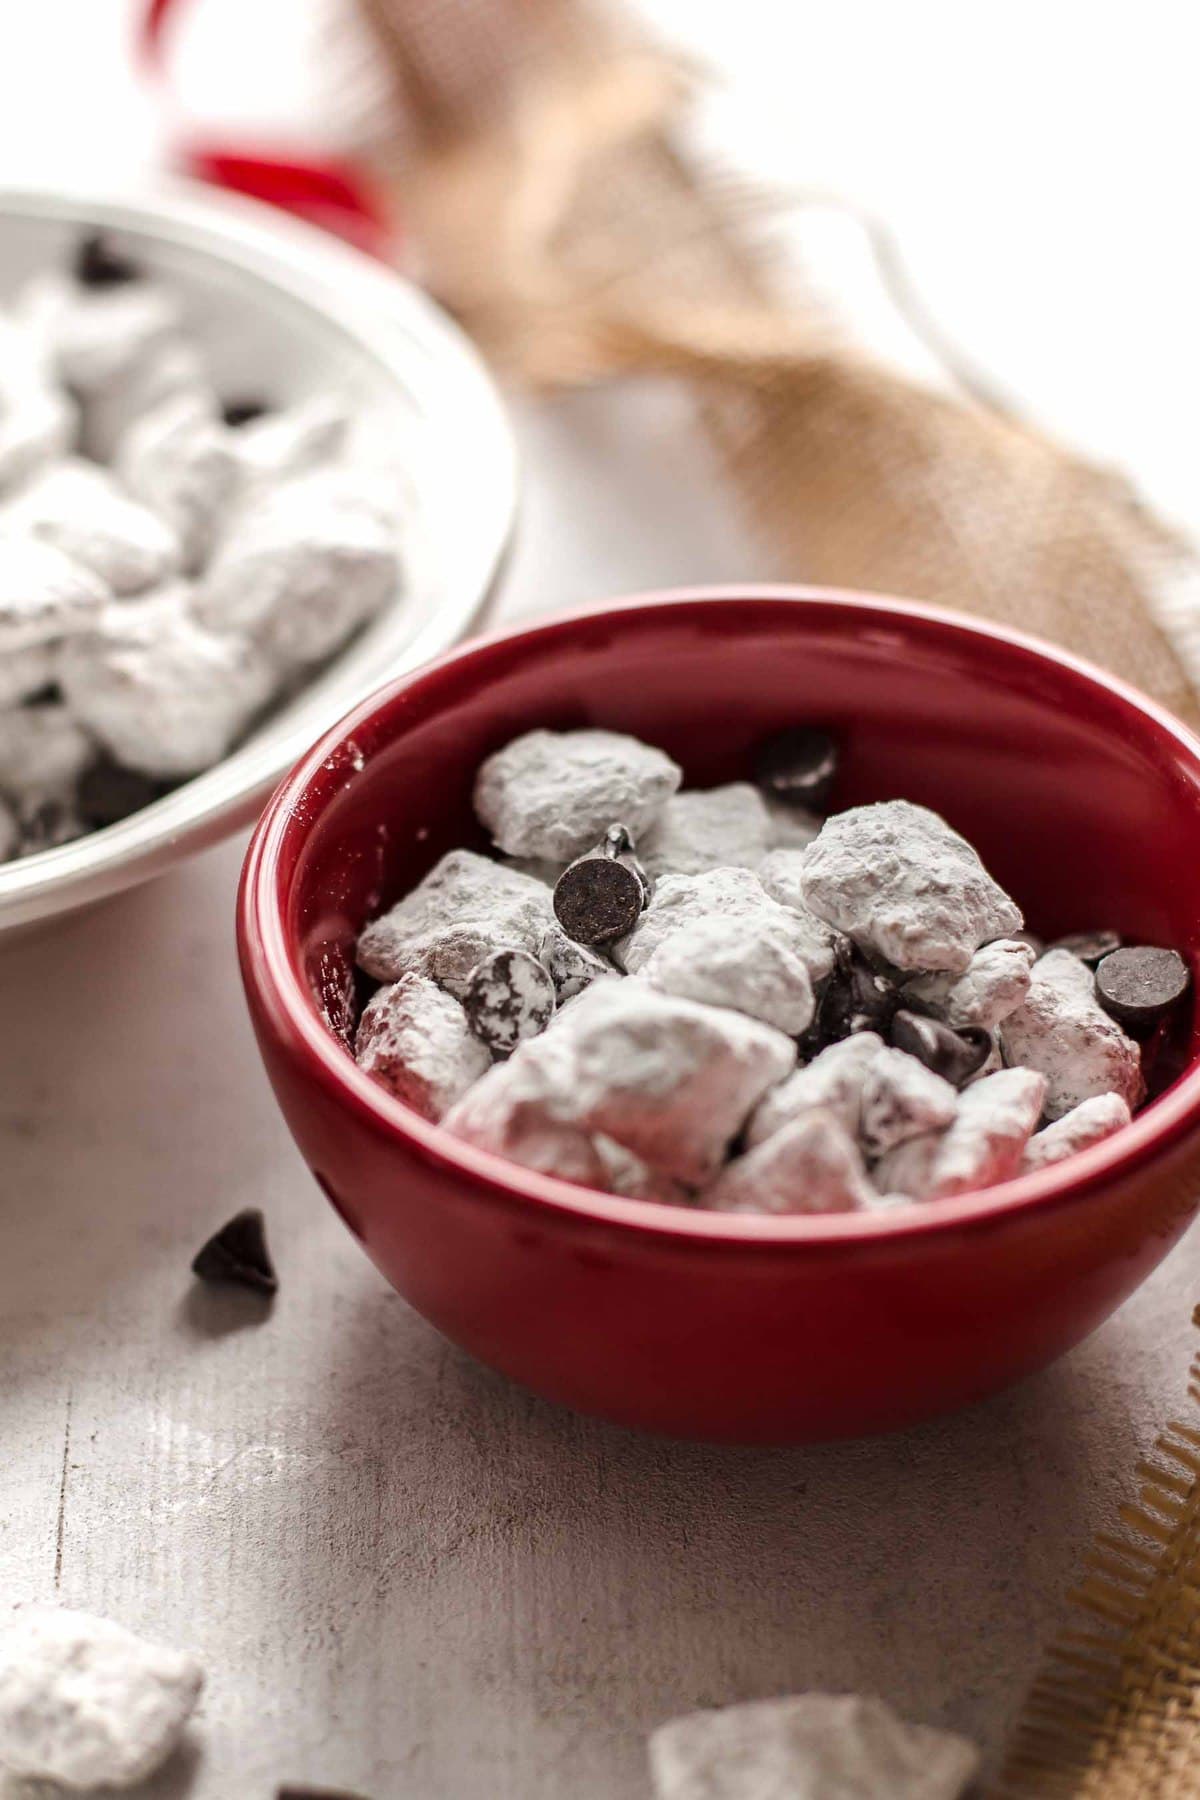 small red bowl of caramel puppy chow with chocolate chips